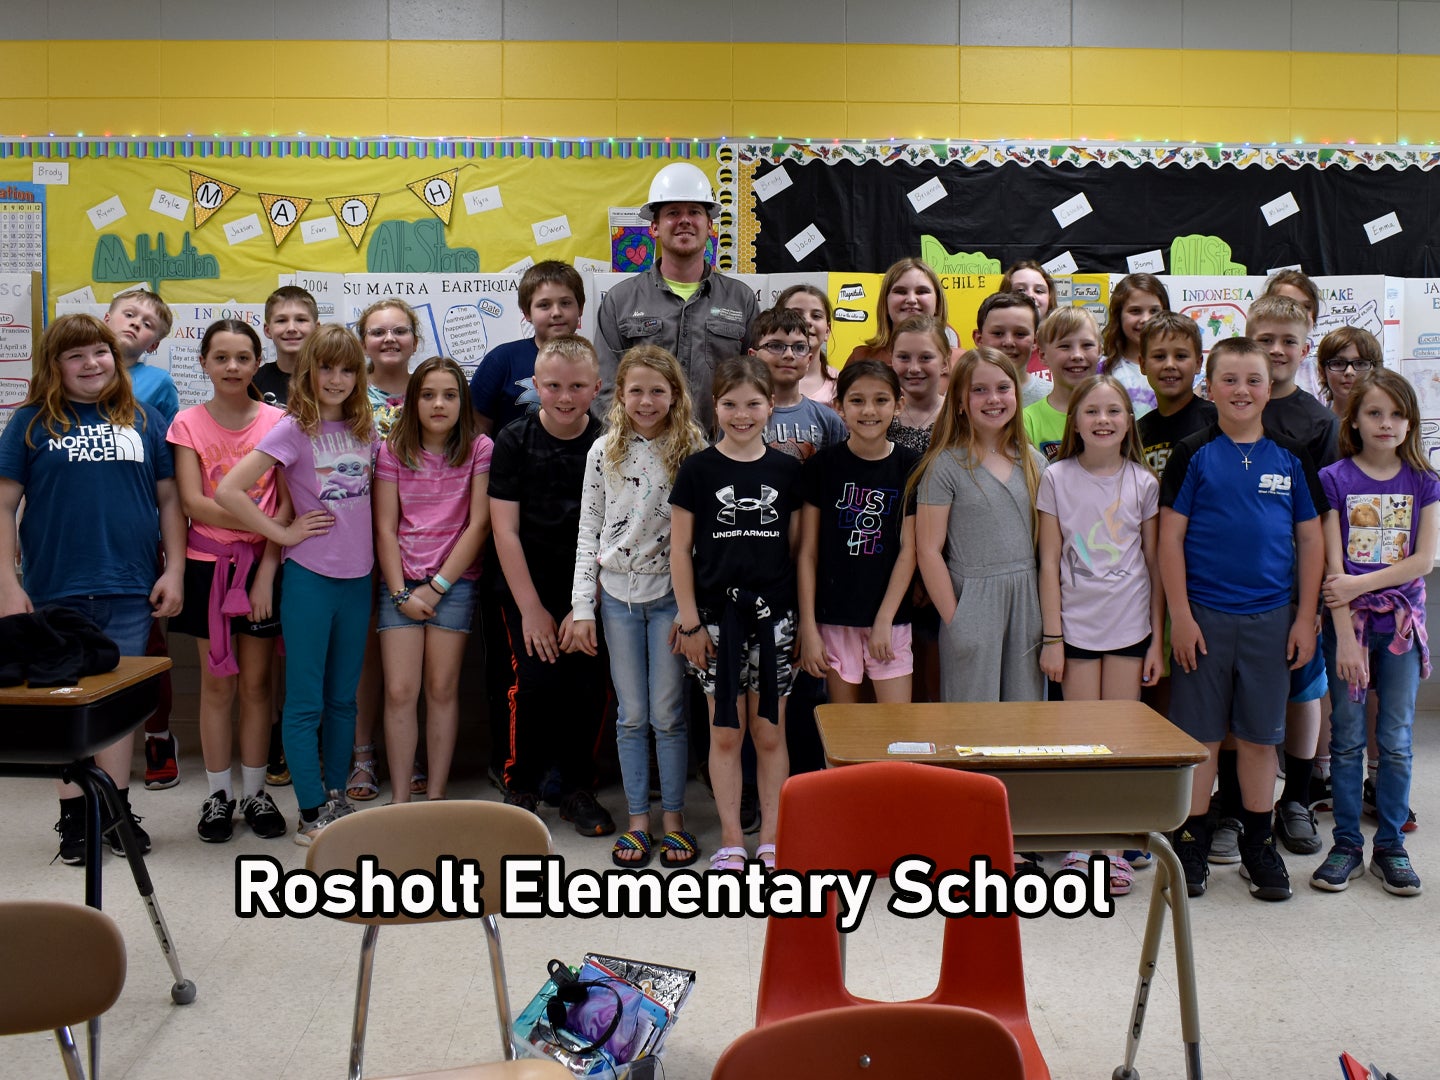 CWEC lineman Nate Singer with the Rosholt Elementary School 4th grade class